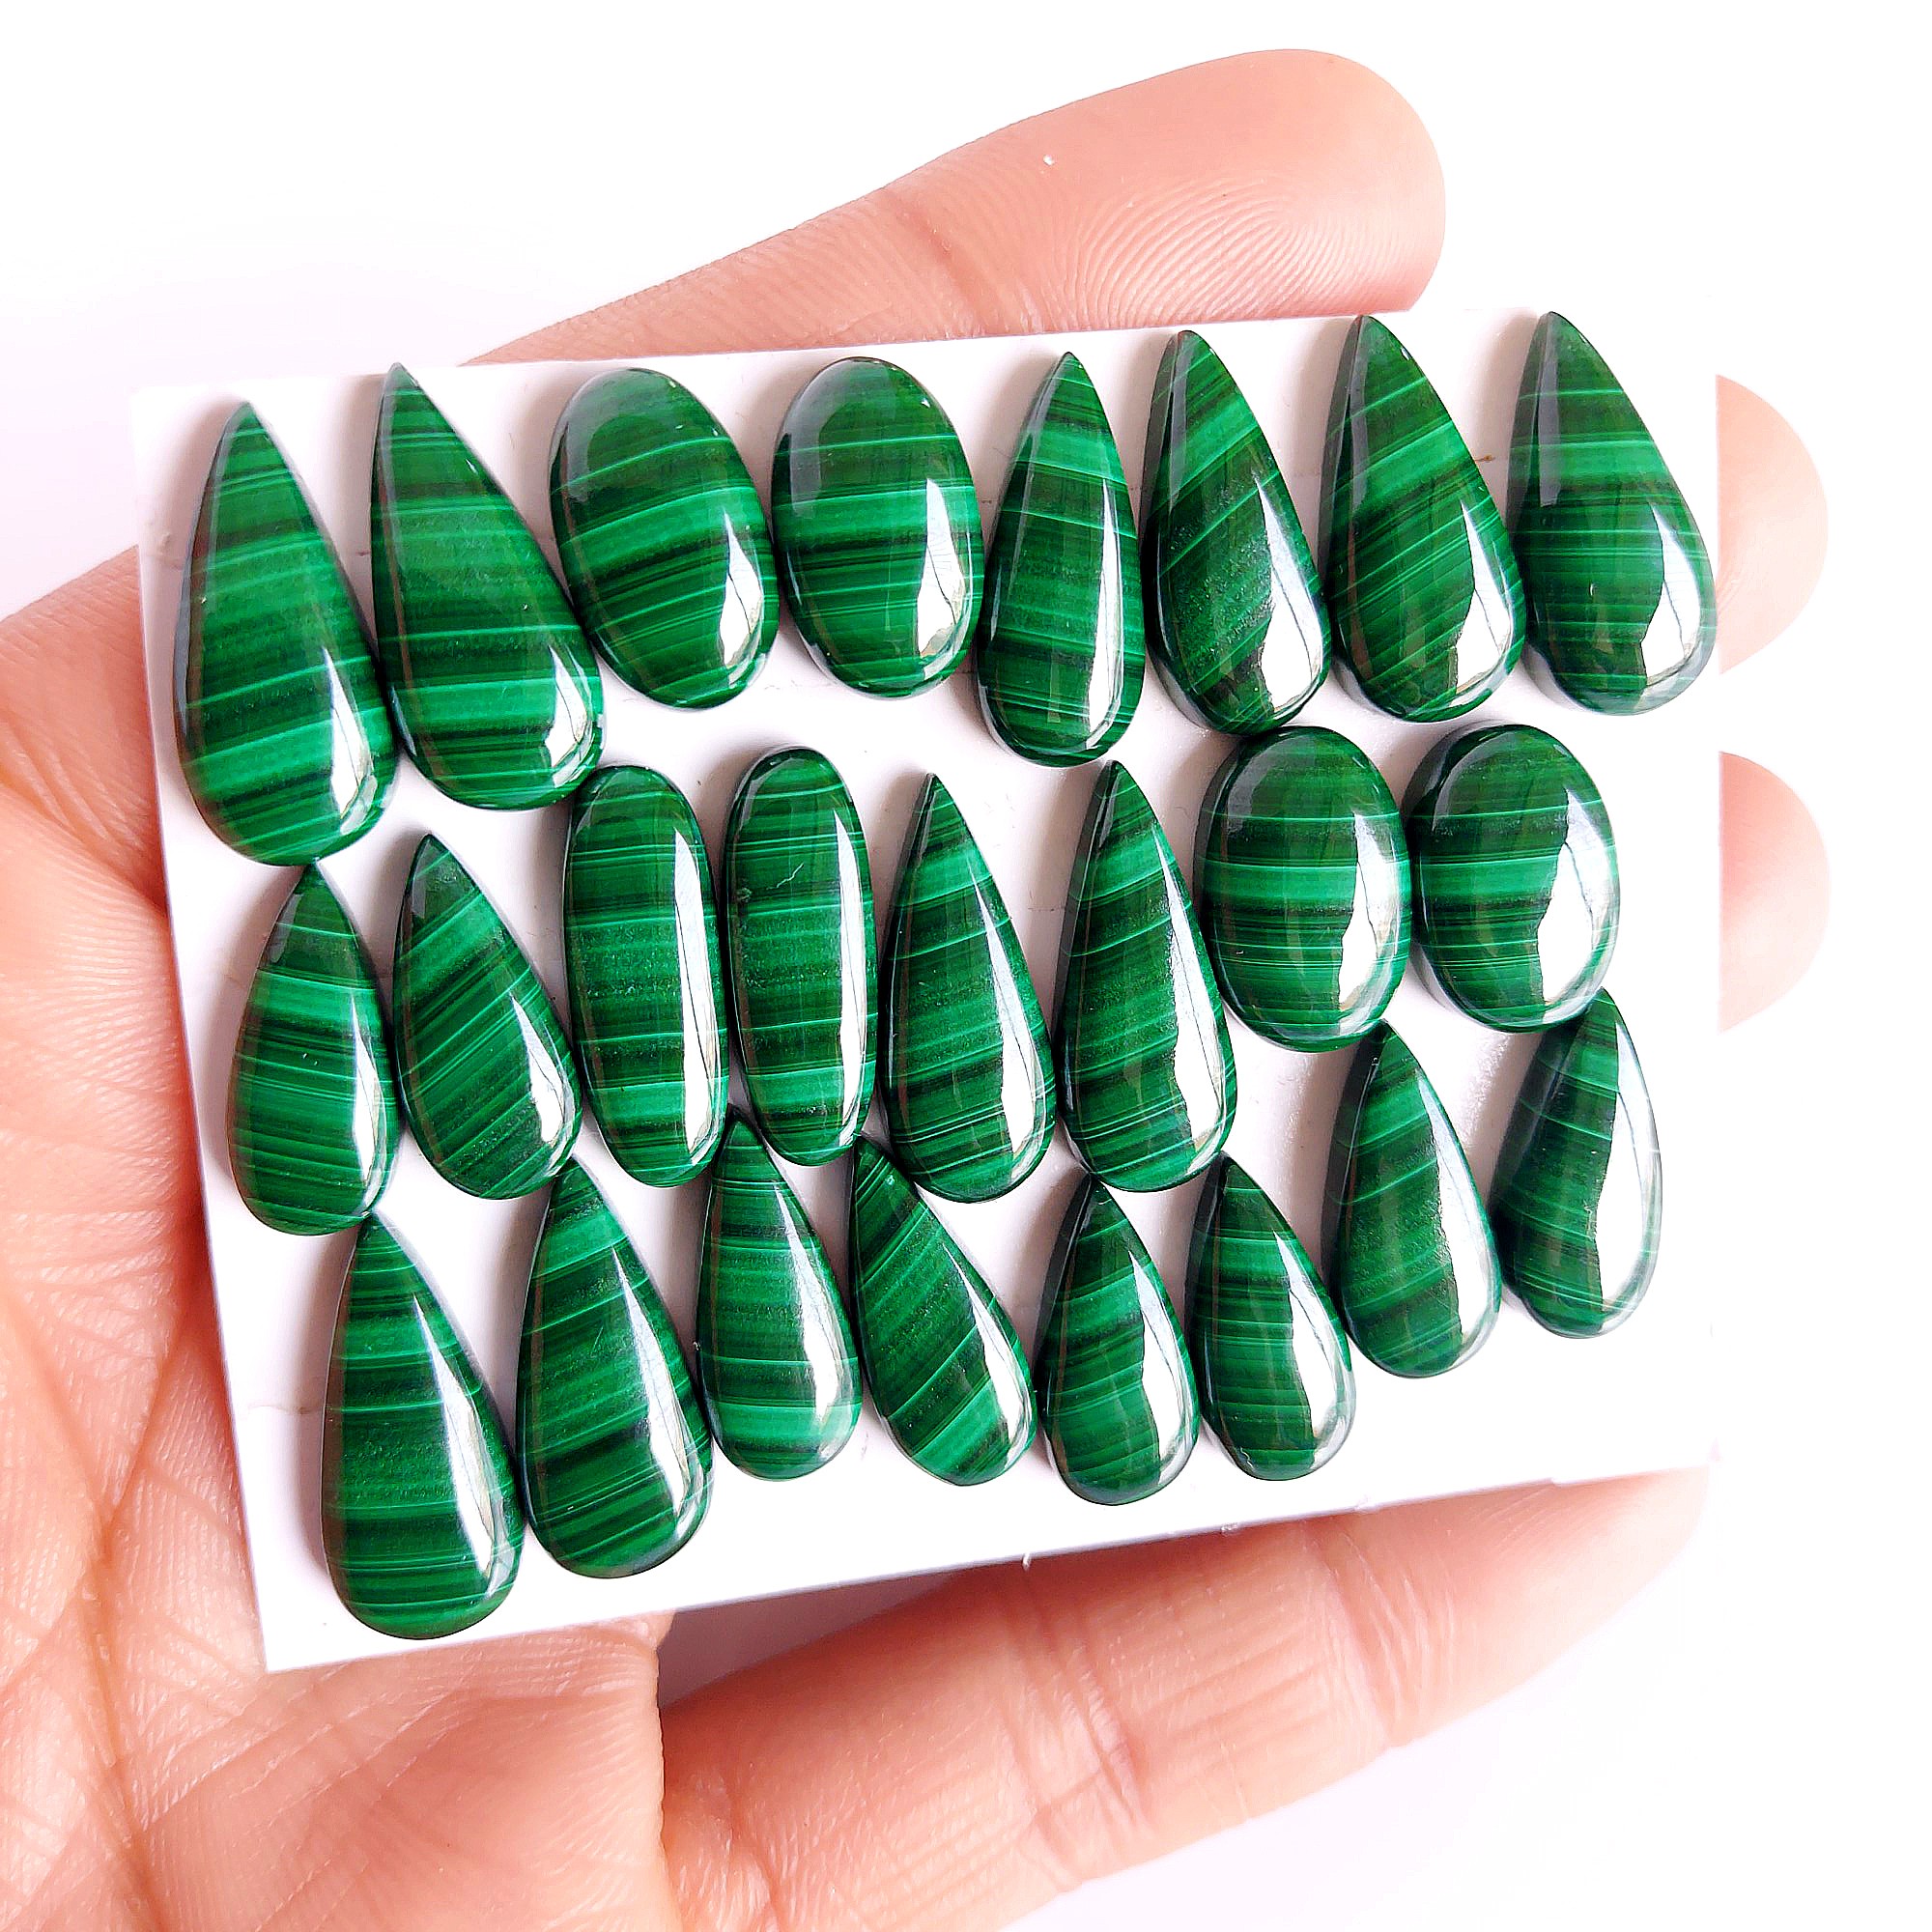 220.Cts 12 pair Natural Smooth Malachite Matched Earring Pair Mix Loose Briolette Gemstone Cabochon Pair Lot Size 20x9 16x10mm